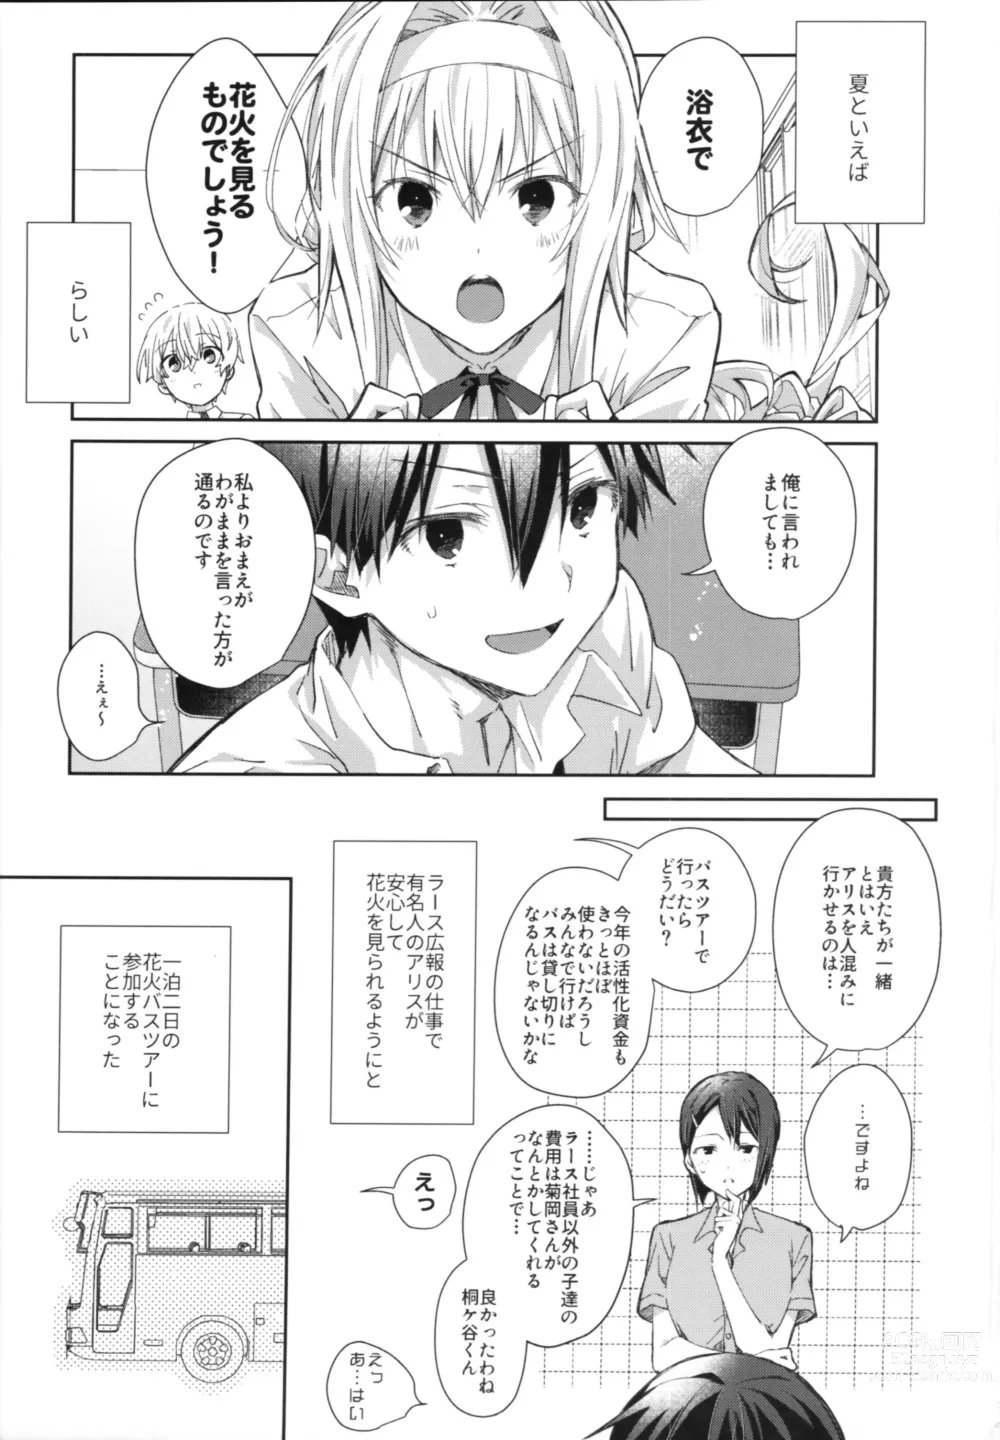 Page 2 of doujinshi Adolescent Summer